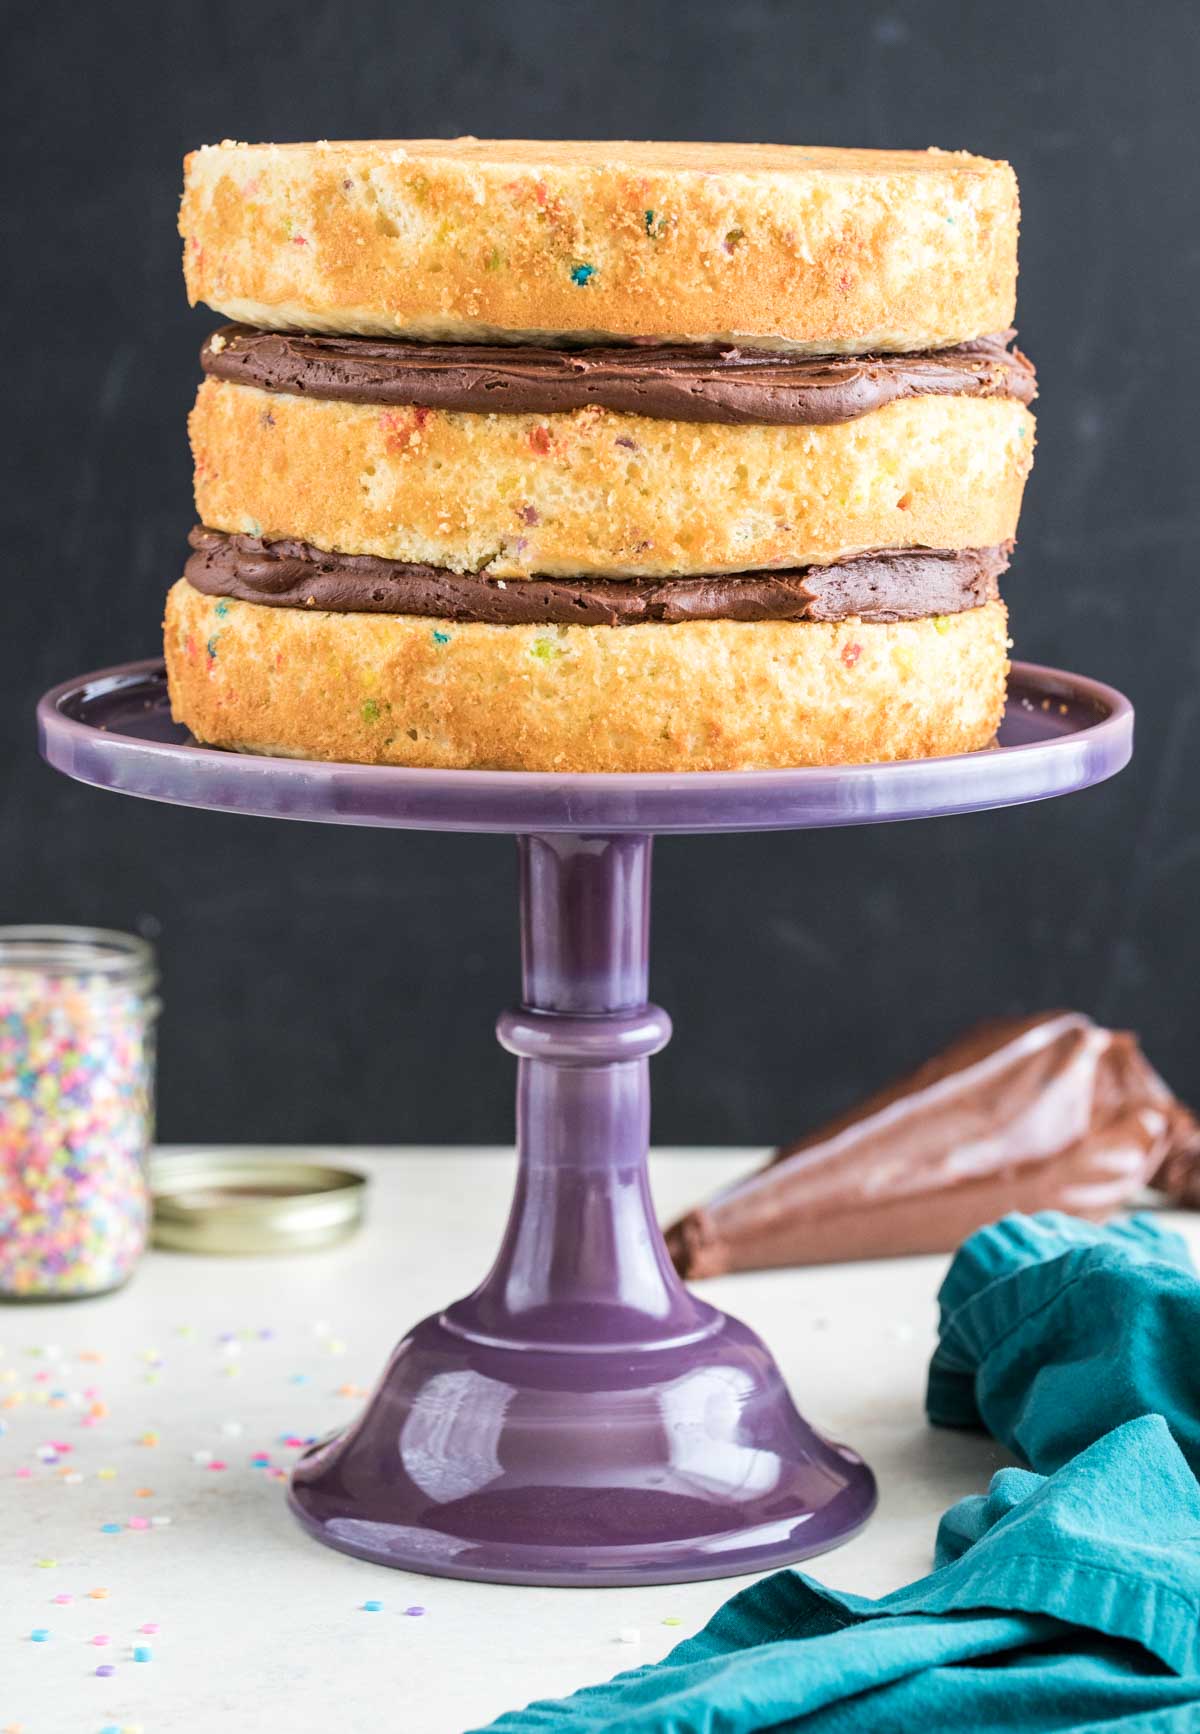 Purple cake stand with three layers of yellow cake stacked with chocolate frosting in between.